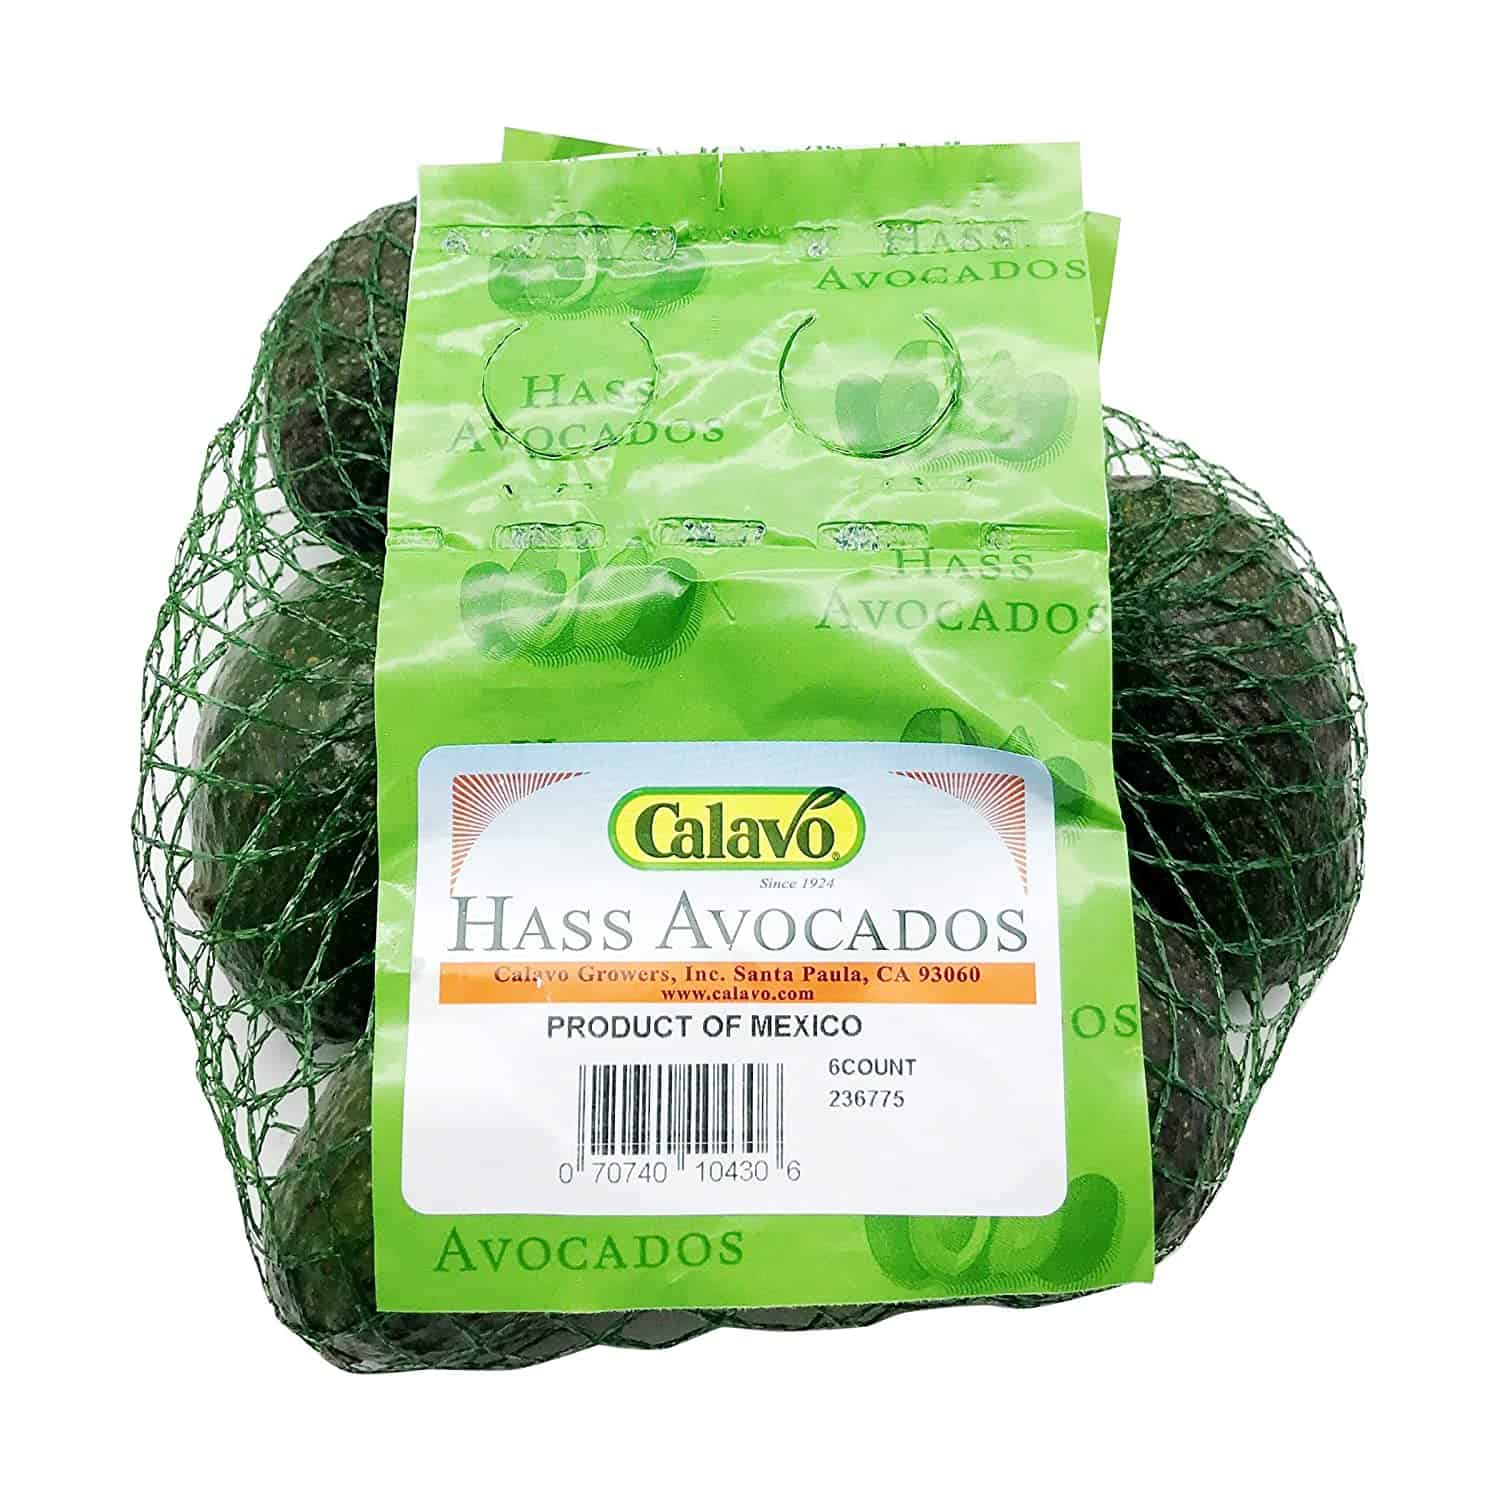 Oasis Fresh Avocado Hass Bag Conventional, 6 Count